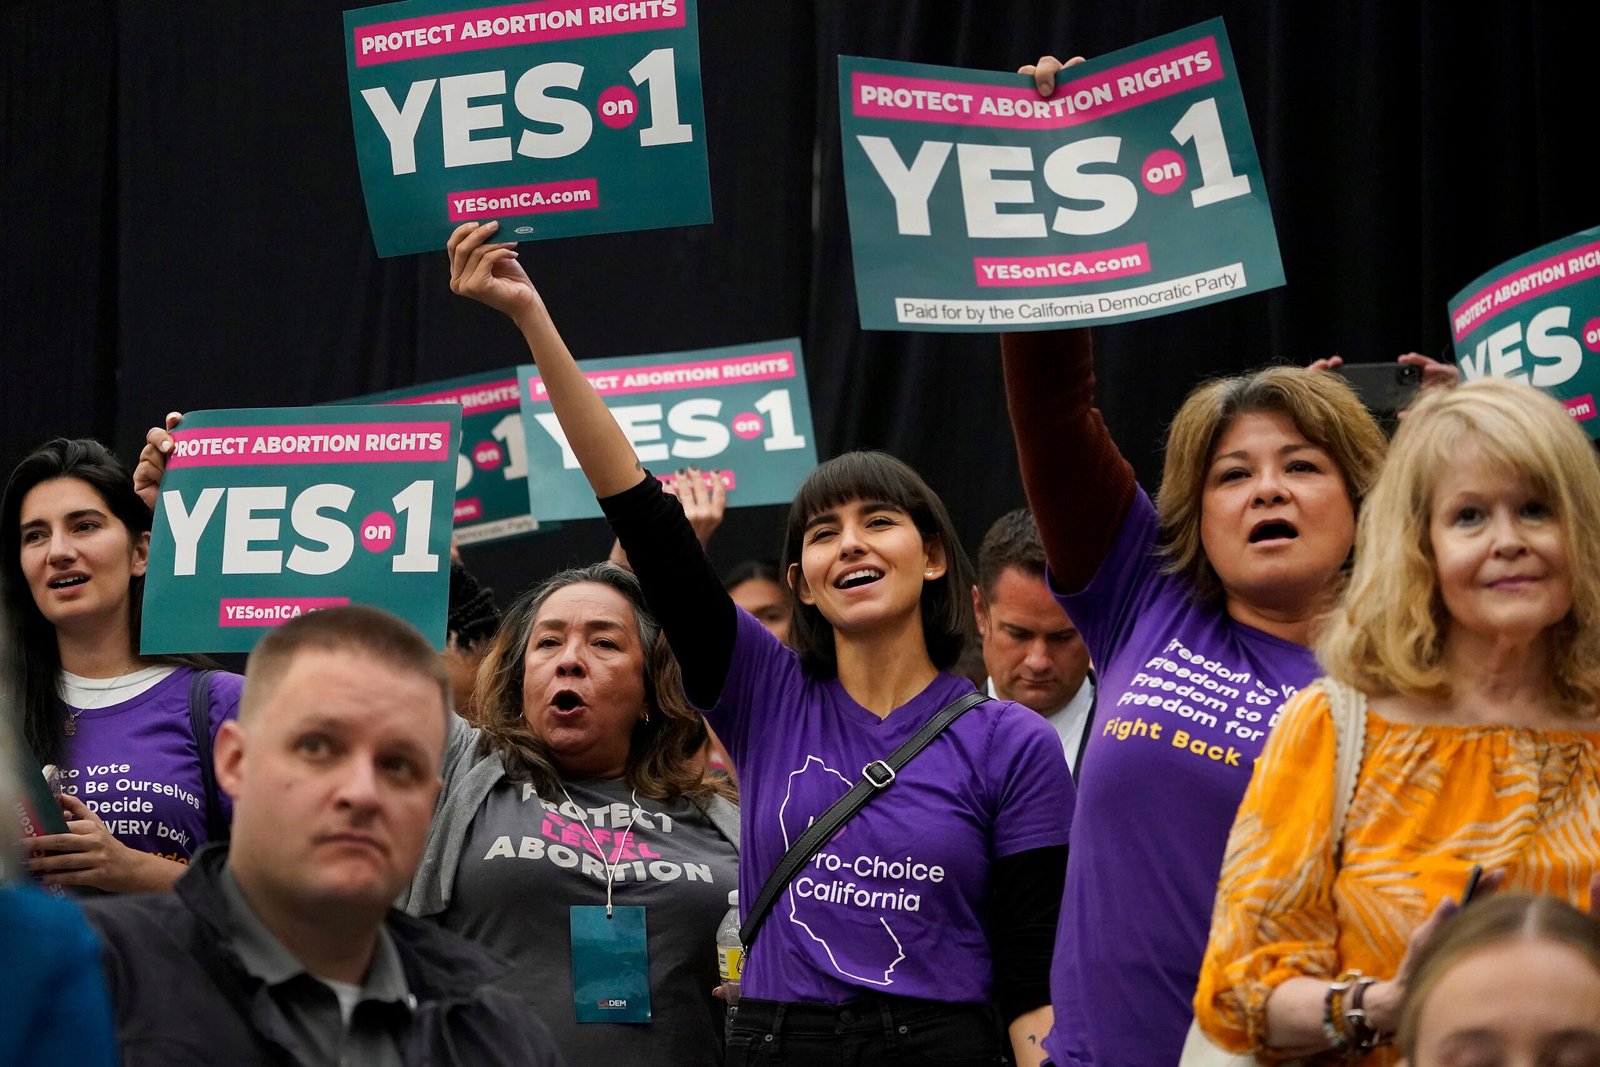 SAFE HAVEN: ABORTION IS ENSHRINED IN CALIFORNIA’S CONSTITUTION, BUT THE FIGHT ISN’T OVER